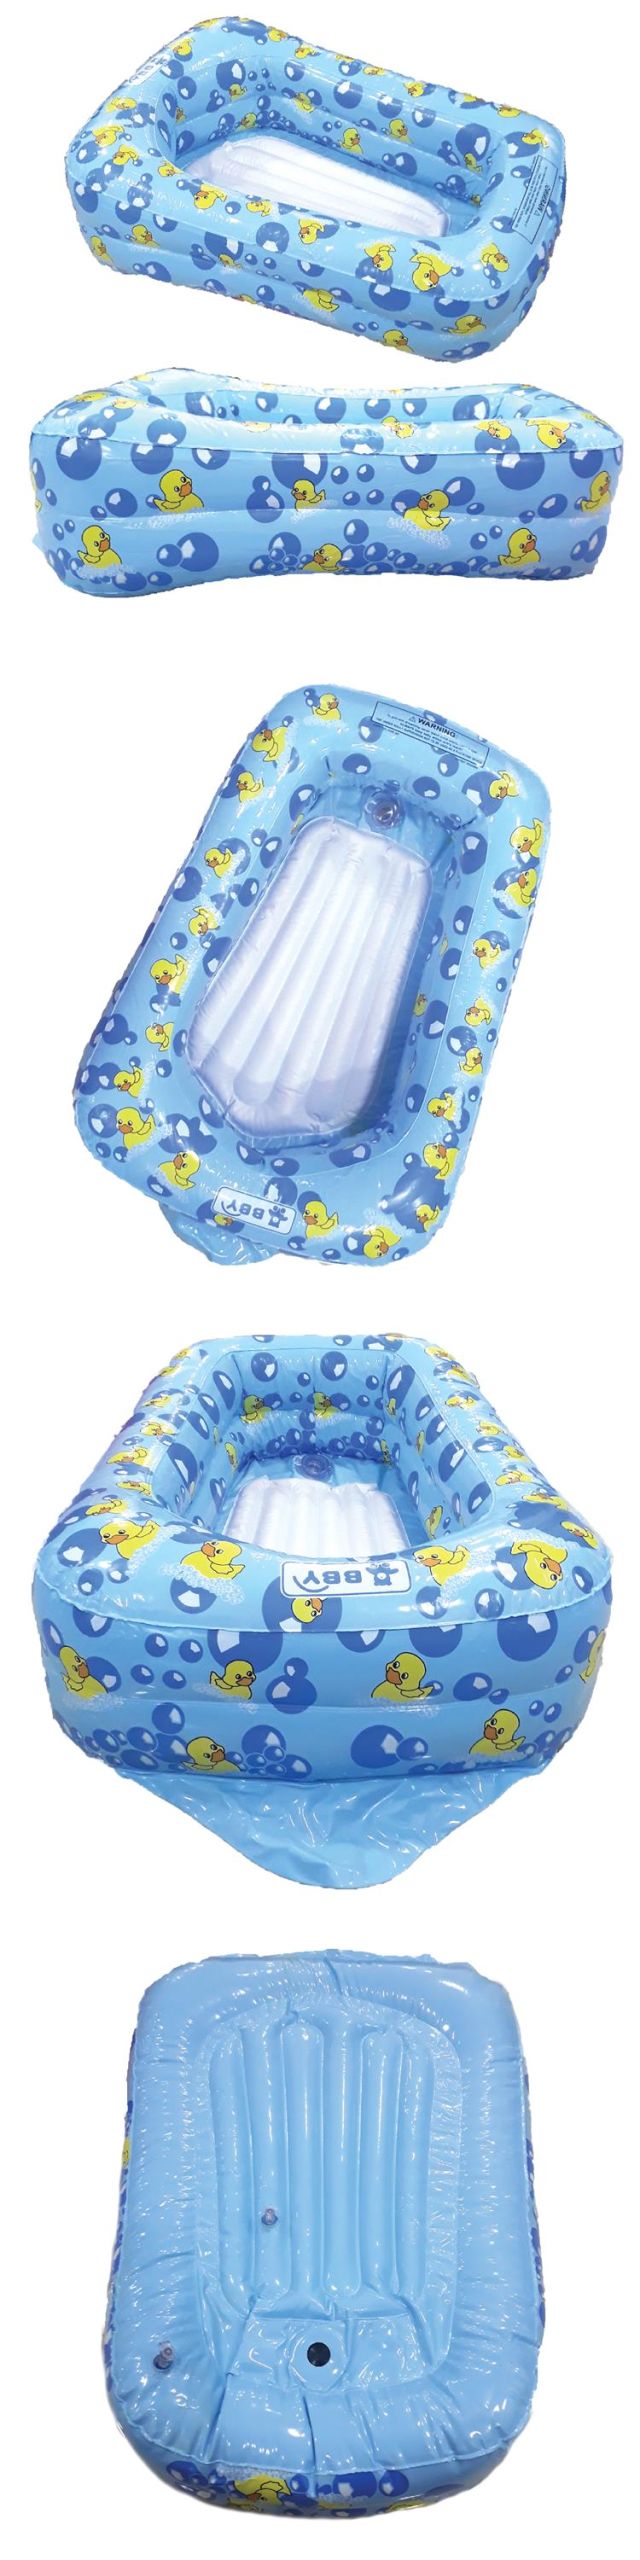 baby inflatable bath tub padded space safe fortable mini pool duck tar online 2020 07 Sale P